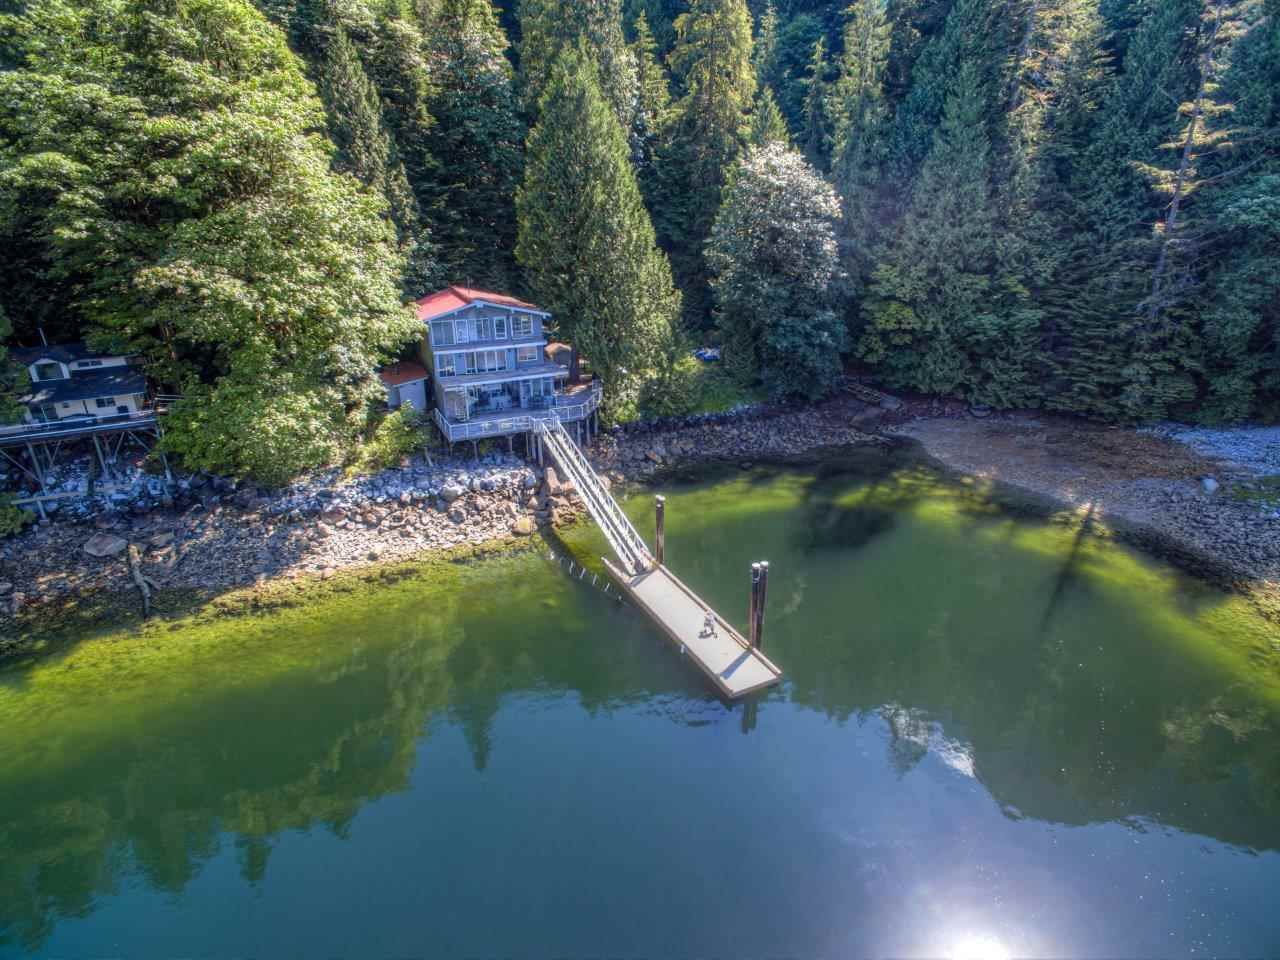 Main Photo: 20 E OF CROKER ISLAND in North Vancouver: Indian Arm House for sale : MLS®# R2471731